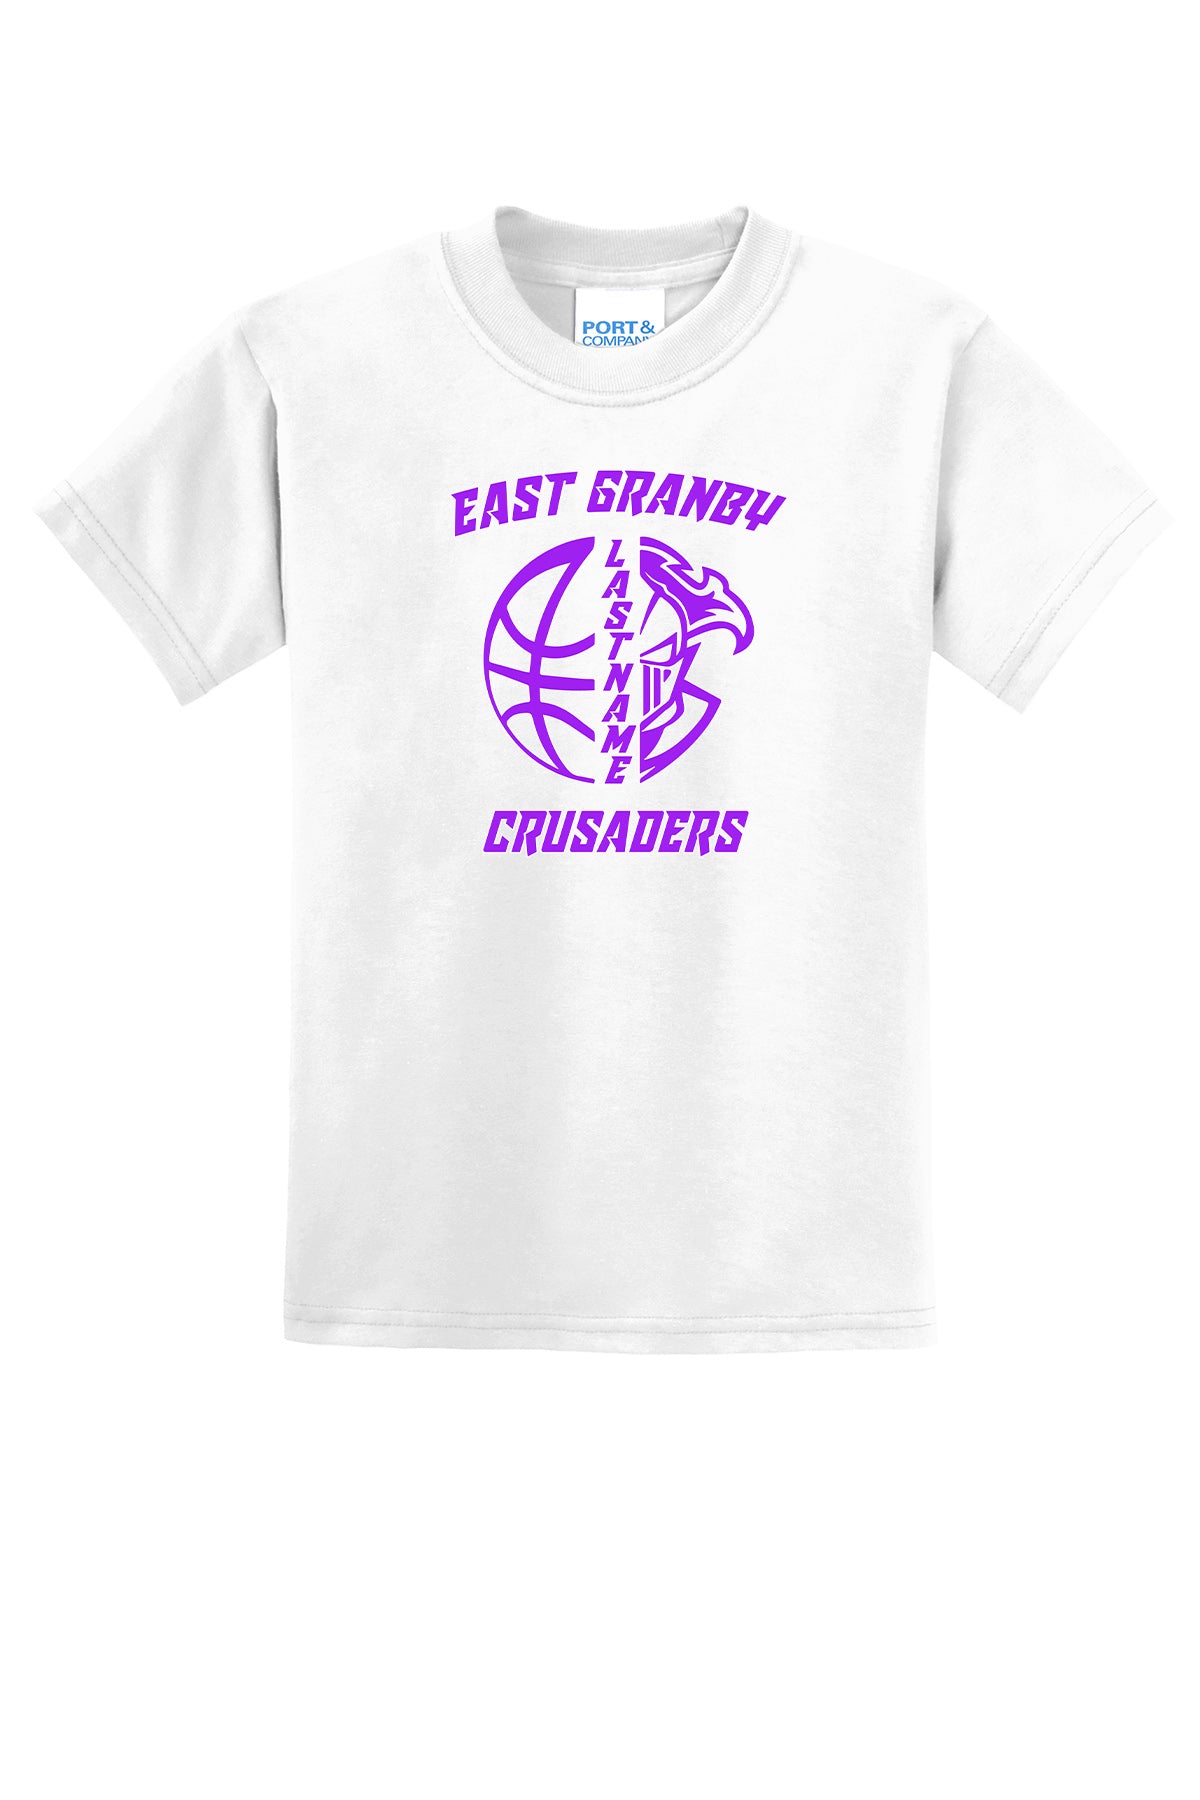 EG Travel Youth T-shirt "Custom Last Name" - PC55Y (color options available)